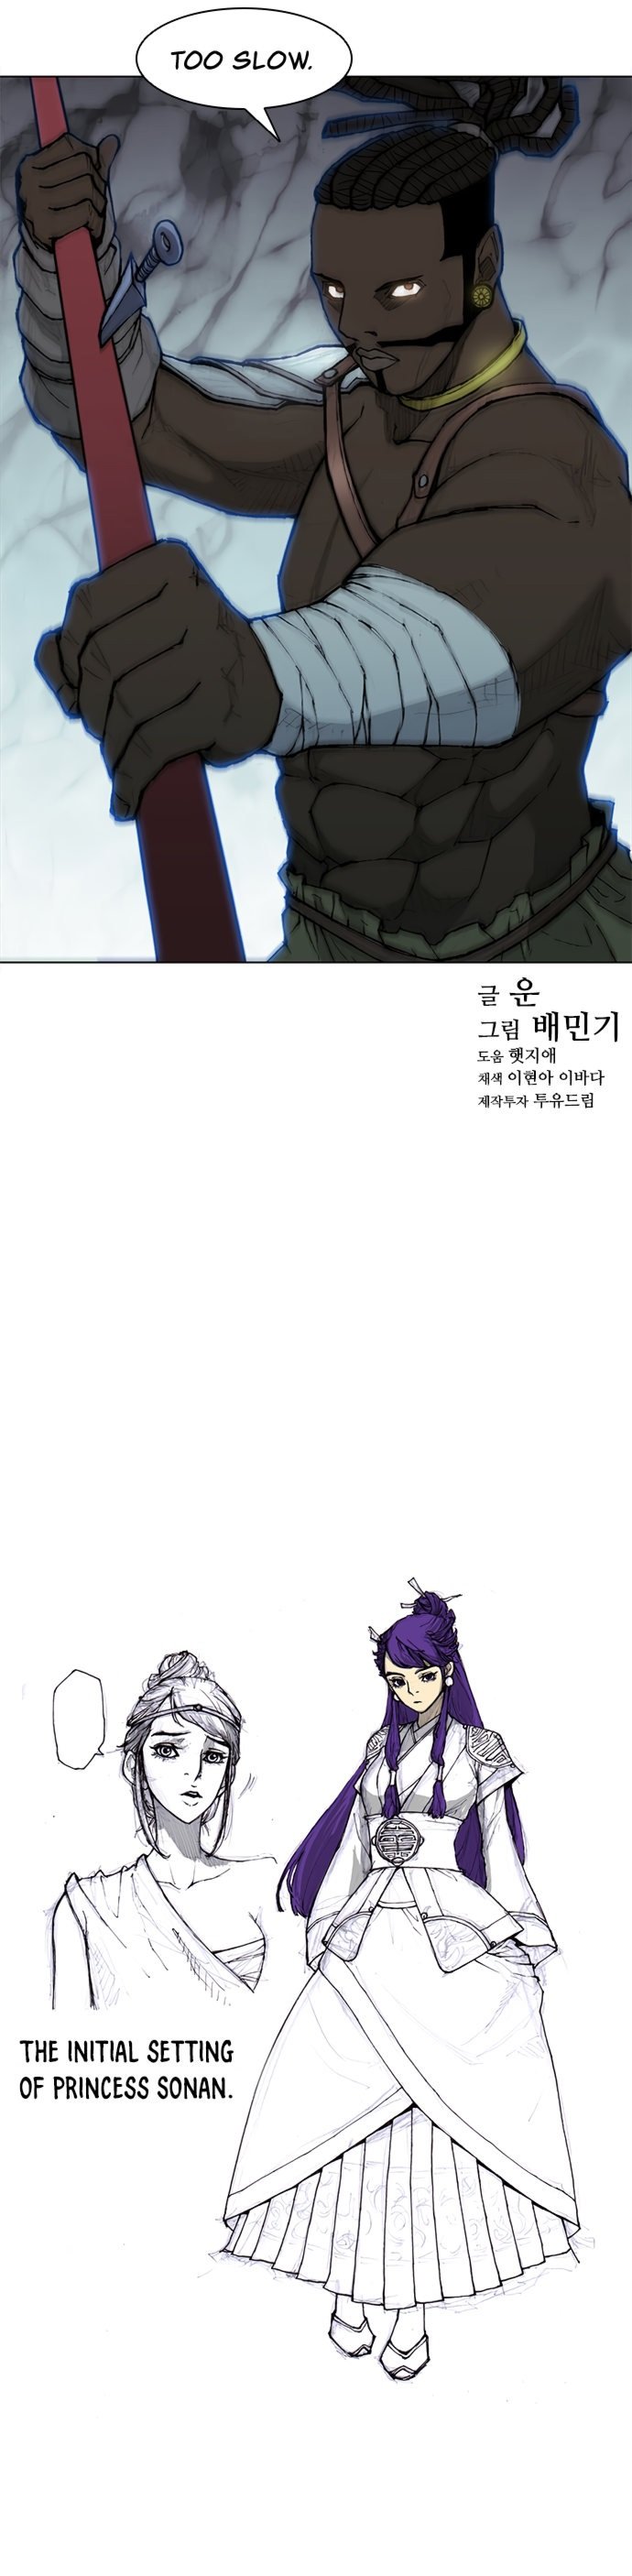 long-way-of-the-warrior-chap-36-12